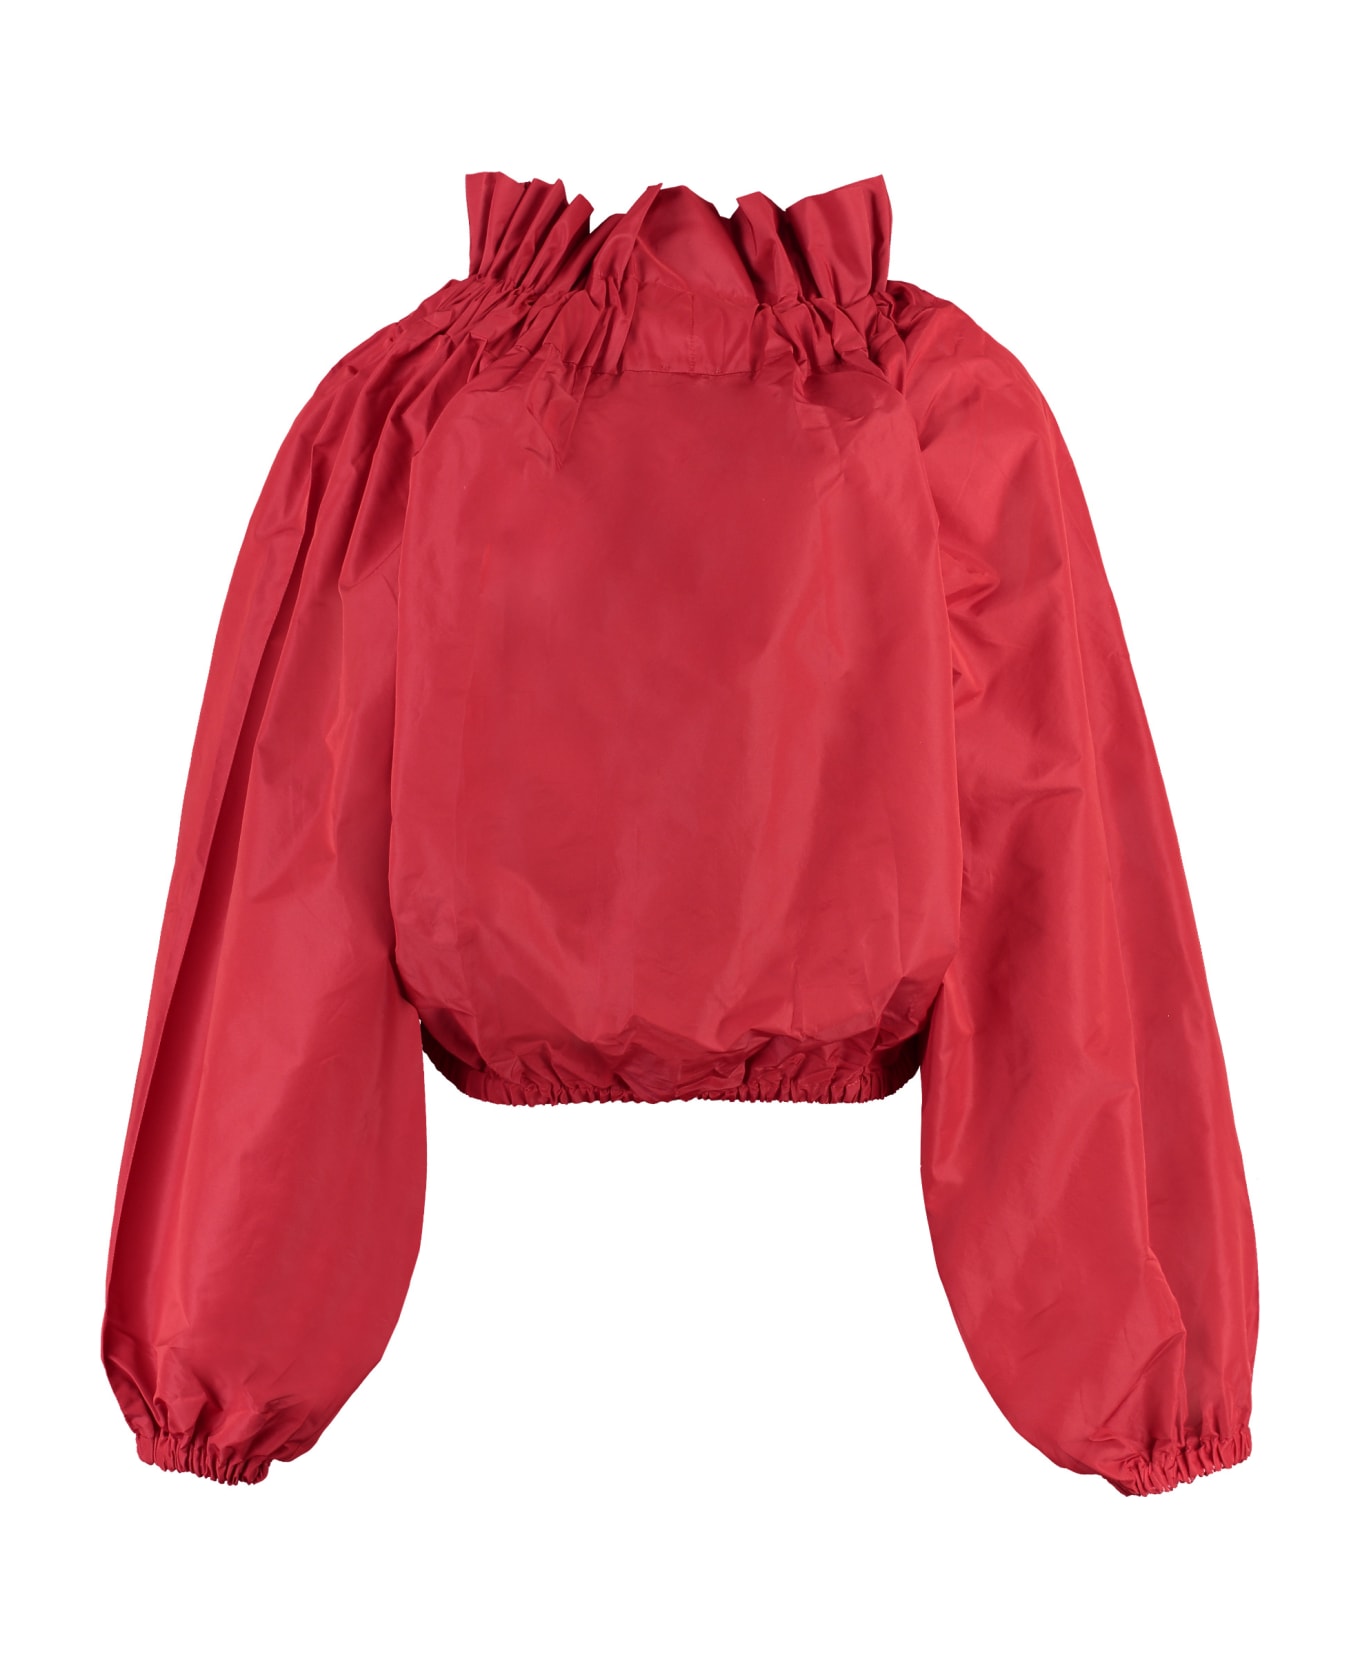 Patou Ruffled Cotton Blouse - red ブラウス